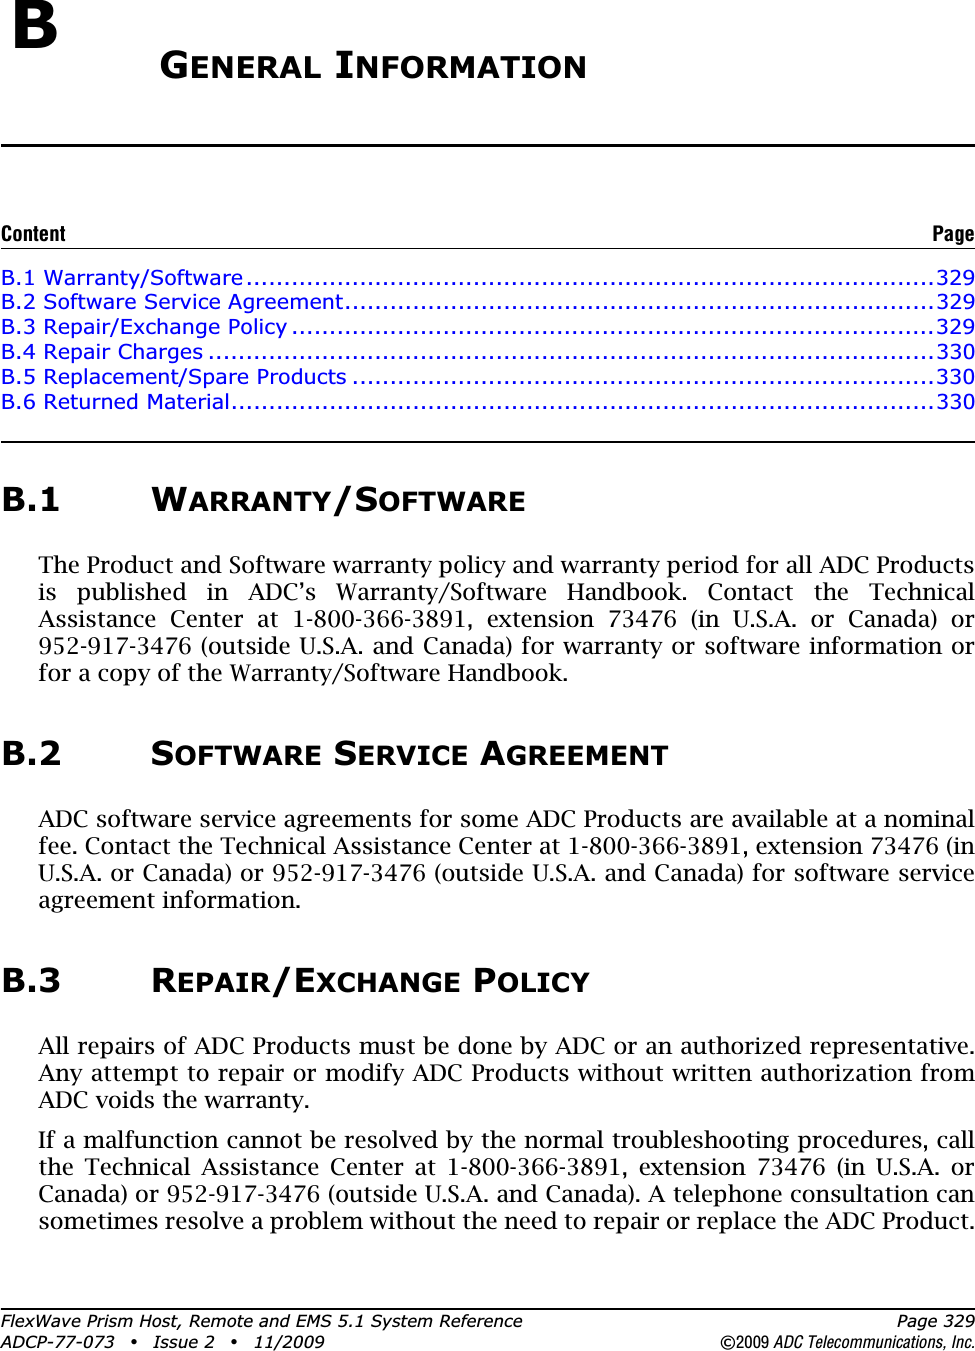 FlexWave Prism Host, Remote and EMS 5.1 System Reference Page 329ADCP-77-073 • Issue 2 • 11/2009 ©2009 ADC Telecommunications, Inc.BGENERAL INFORMATIONB.1 Warranty/Software...........................................................................................329B.2 Software Service Agreement..............................................................................329B.3 Repair/Exchange Policy .....................................................................................329B.4 Repair Charges ................................................................................................330B.5 Replacement/Spare Products .............................................................................330B.6 Returned Material.............................................................................................330B.1 WARRANTY/SOFTWAREThe Product and Software warranty policy and warranty period for all ADC Products is published in ADC’s Warranty/Software Handbook. Contact the Technical Assistance Center at 1-800-366-3891, extension 73476 (in U.S.A. or Canada) or 952-917-3476 (outside U.S.A. and Canada) for warranty or software information or for a copy of the Warranty/Software Handbook.B.2 SOFTWARE SERVICE AGREEMENTADC software service agreements for some ADC Products are available at a nominal fee. Contact the Technical Assistance Center at 1-800-366-3891, extension 73476 (in U.S.A. or Canada) or 952-917-3476 (outside U.S.A. and Canada) for software service agreement information.B.3 REPAIR/EXCHANGE POLICYAll repairs of ADC Products must be done by ADC or an authorized representative. Any attempt to repair or modify ADC Products without written authorization from ADC voids the warranty.If a malfunction cannot be resolved by the normal troubleshooting procedures, call the Technical Assistance Center at 1-800-366-3891, extension 73476 (in U.S.A. or Canada) or 952-917-3476 (outside U.S.A. and Canada). A telephone consultation can sometimes resolve a problem without the need to repair or replace the ADC Product.Content Page